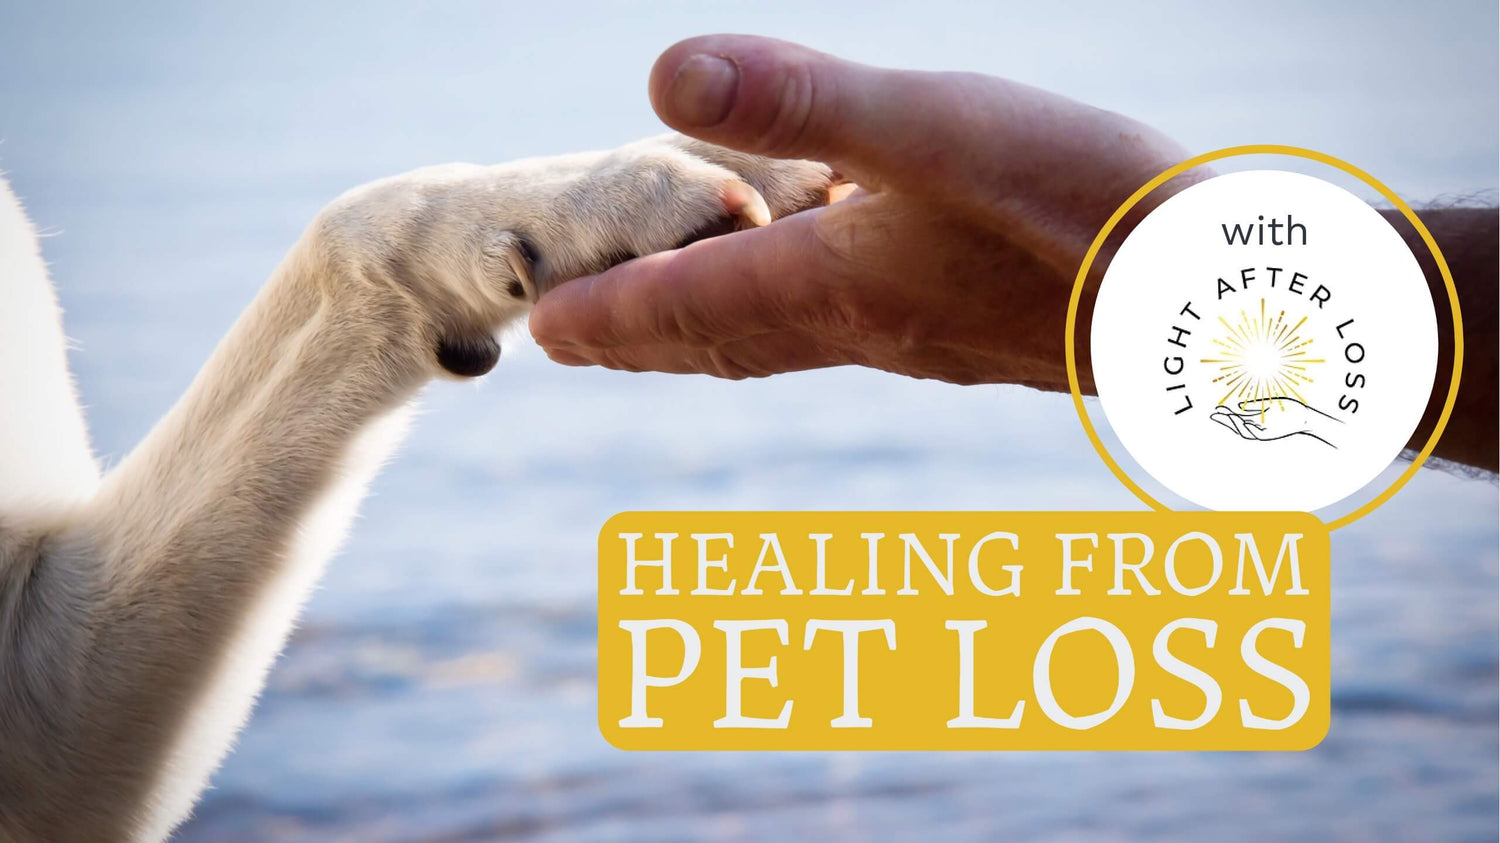 A human hand holding a dogs paw and a box with text “Healing from Pet Loss”